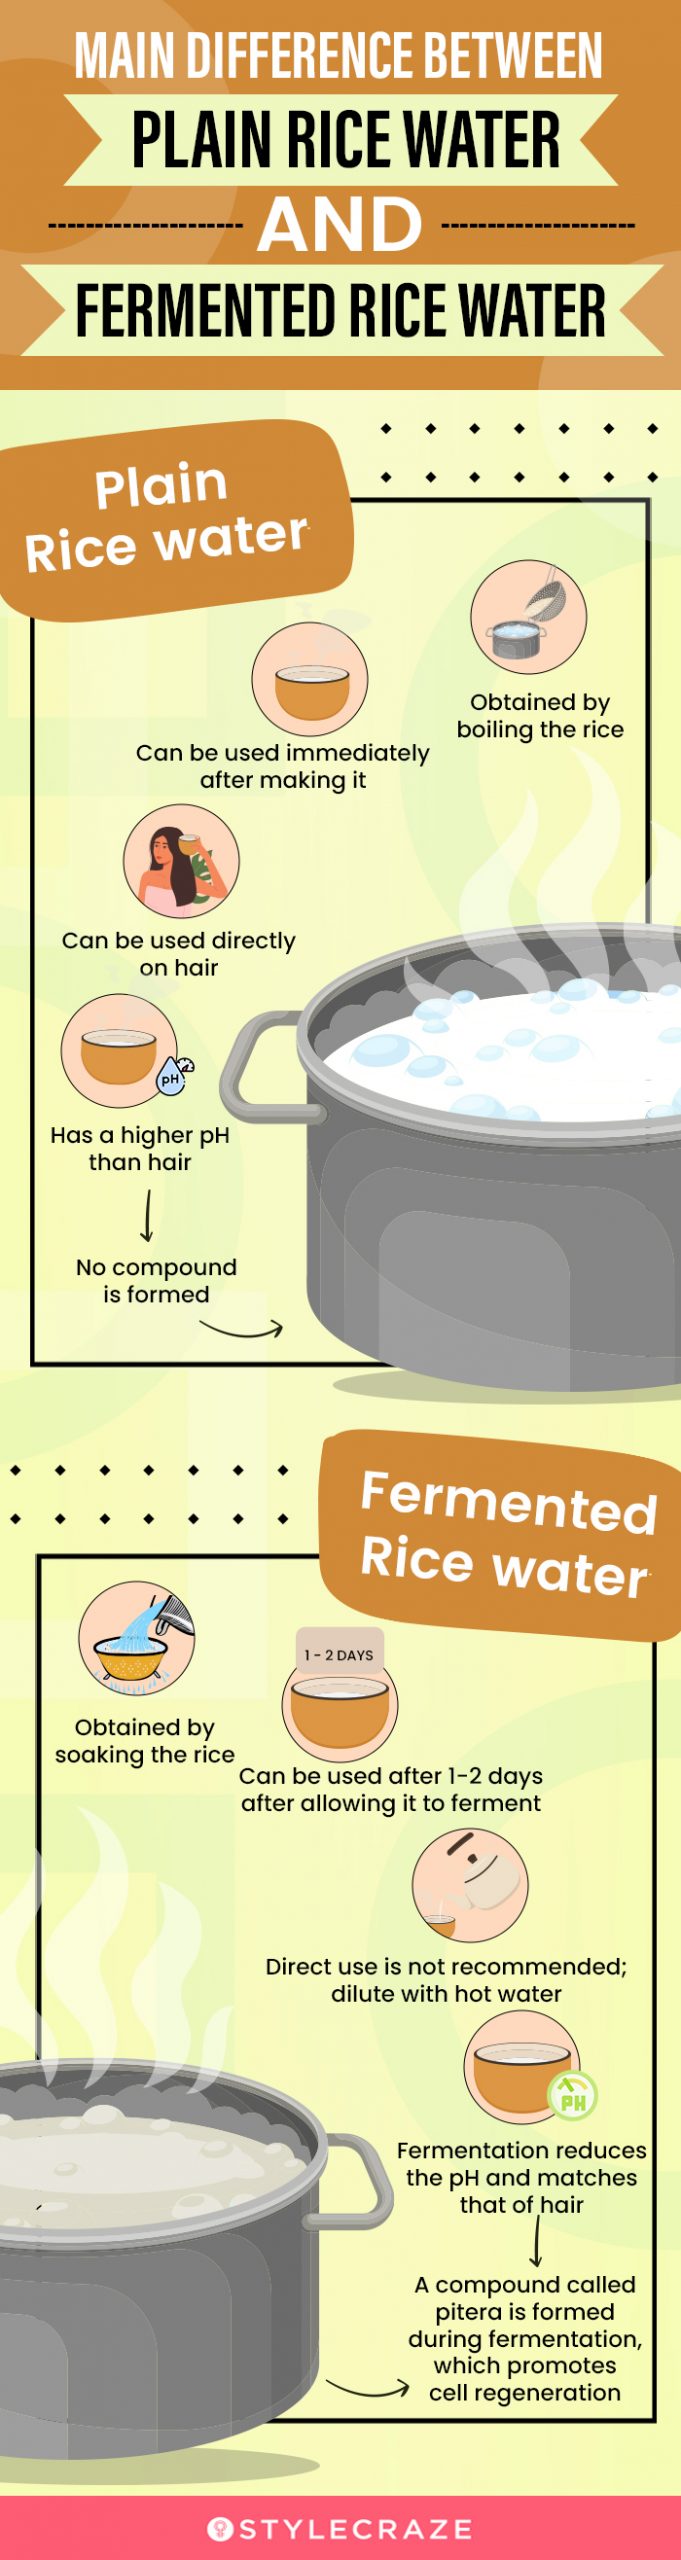 Top 48 image how to use rice water for hair 